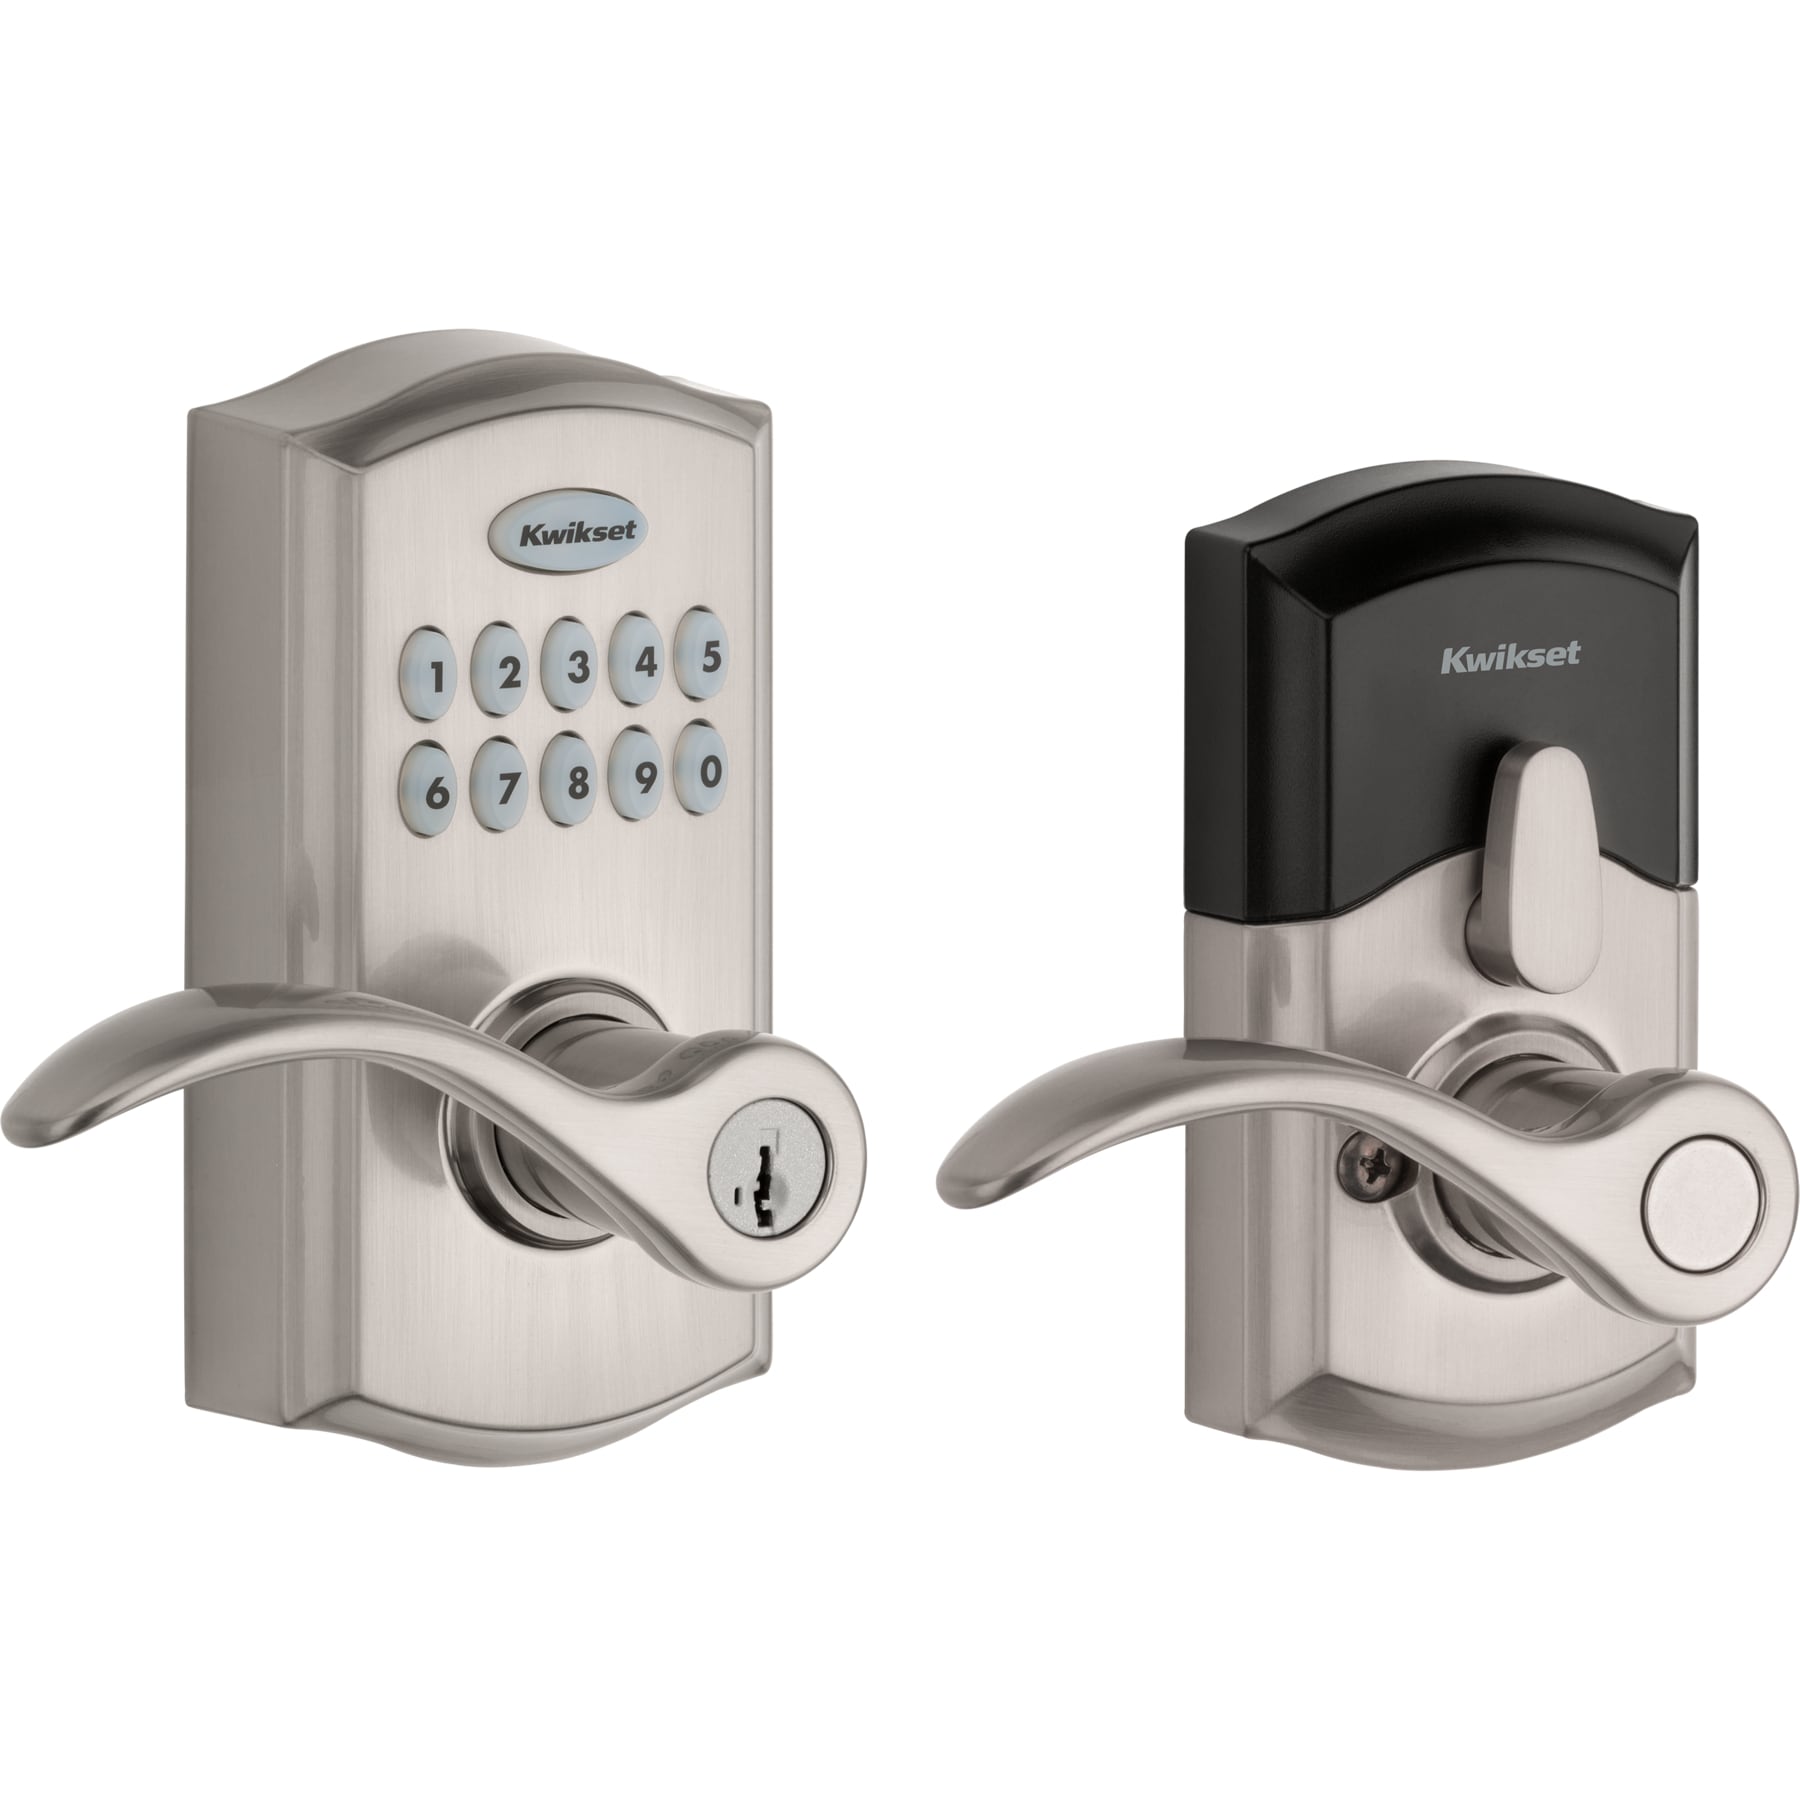 955 Keypad Kwikset Nickel SmartCode Locks Cylinder Electronic Single Handle Signature department Door the in Satin Series Lighted at Electronic Smartkey